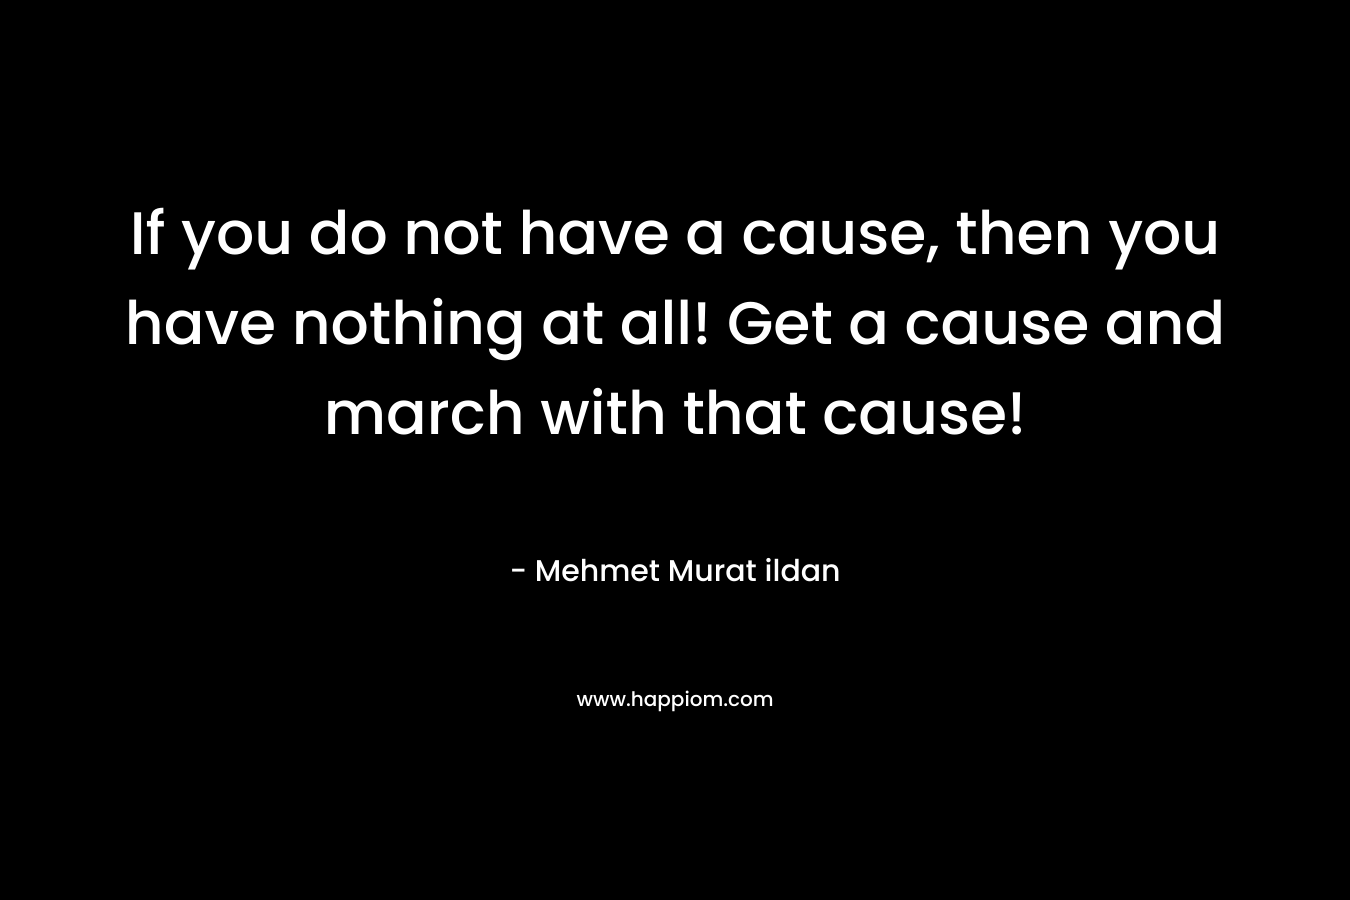 If you do not have a cause, then you have nothing at all! Get a cause and march with that cause! – Mehmet Murat ildan